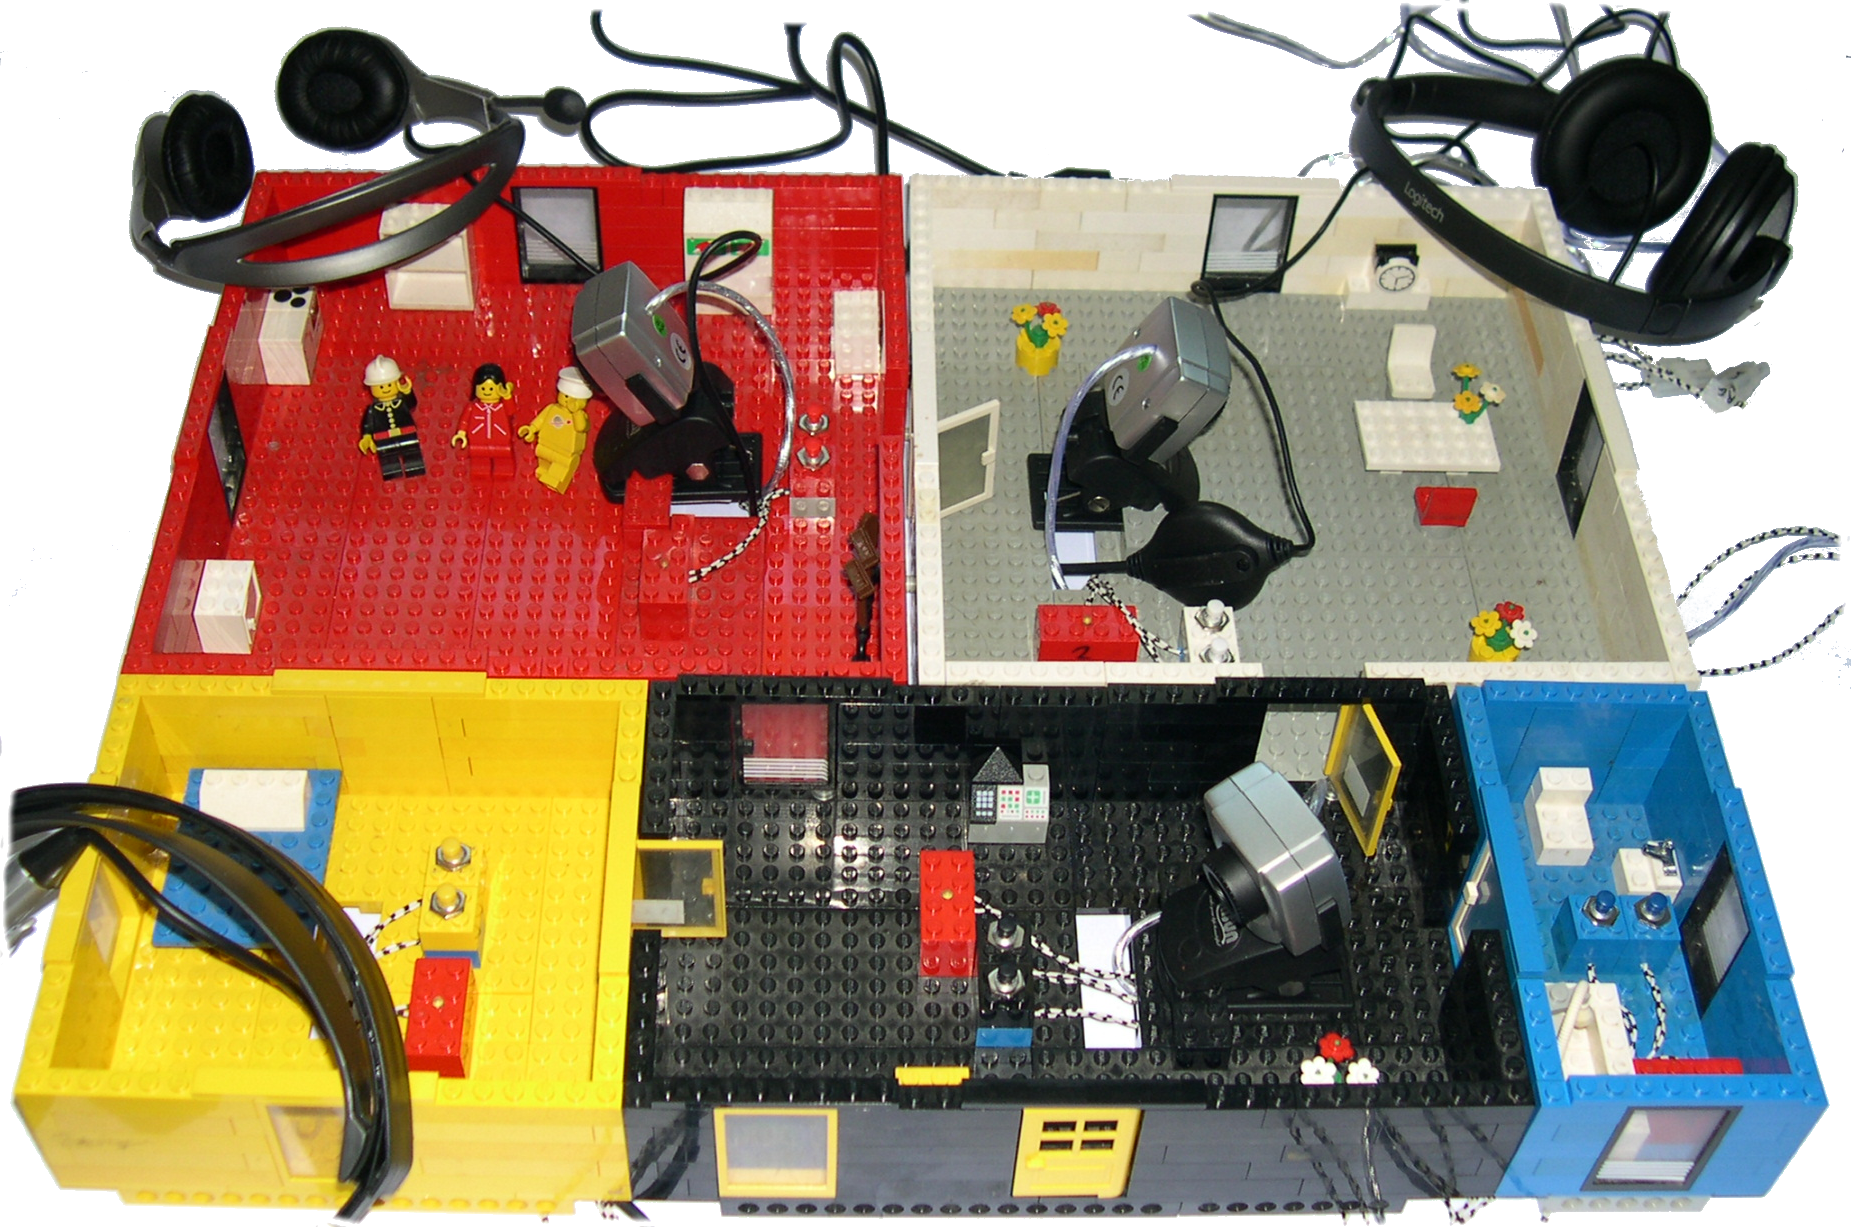 The Lego-eHome-demonstrator in its normal setup.